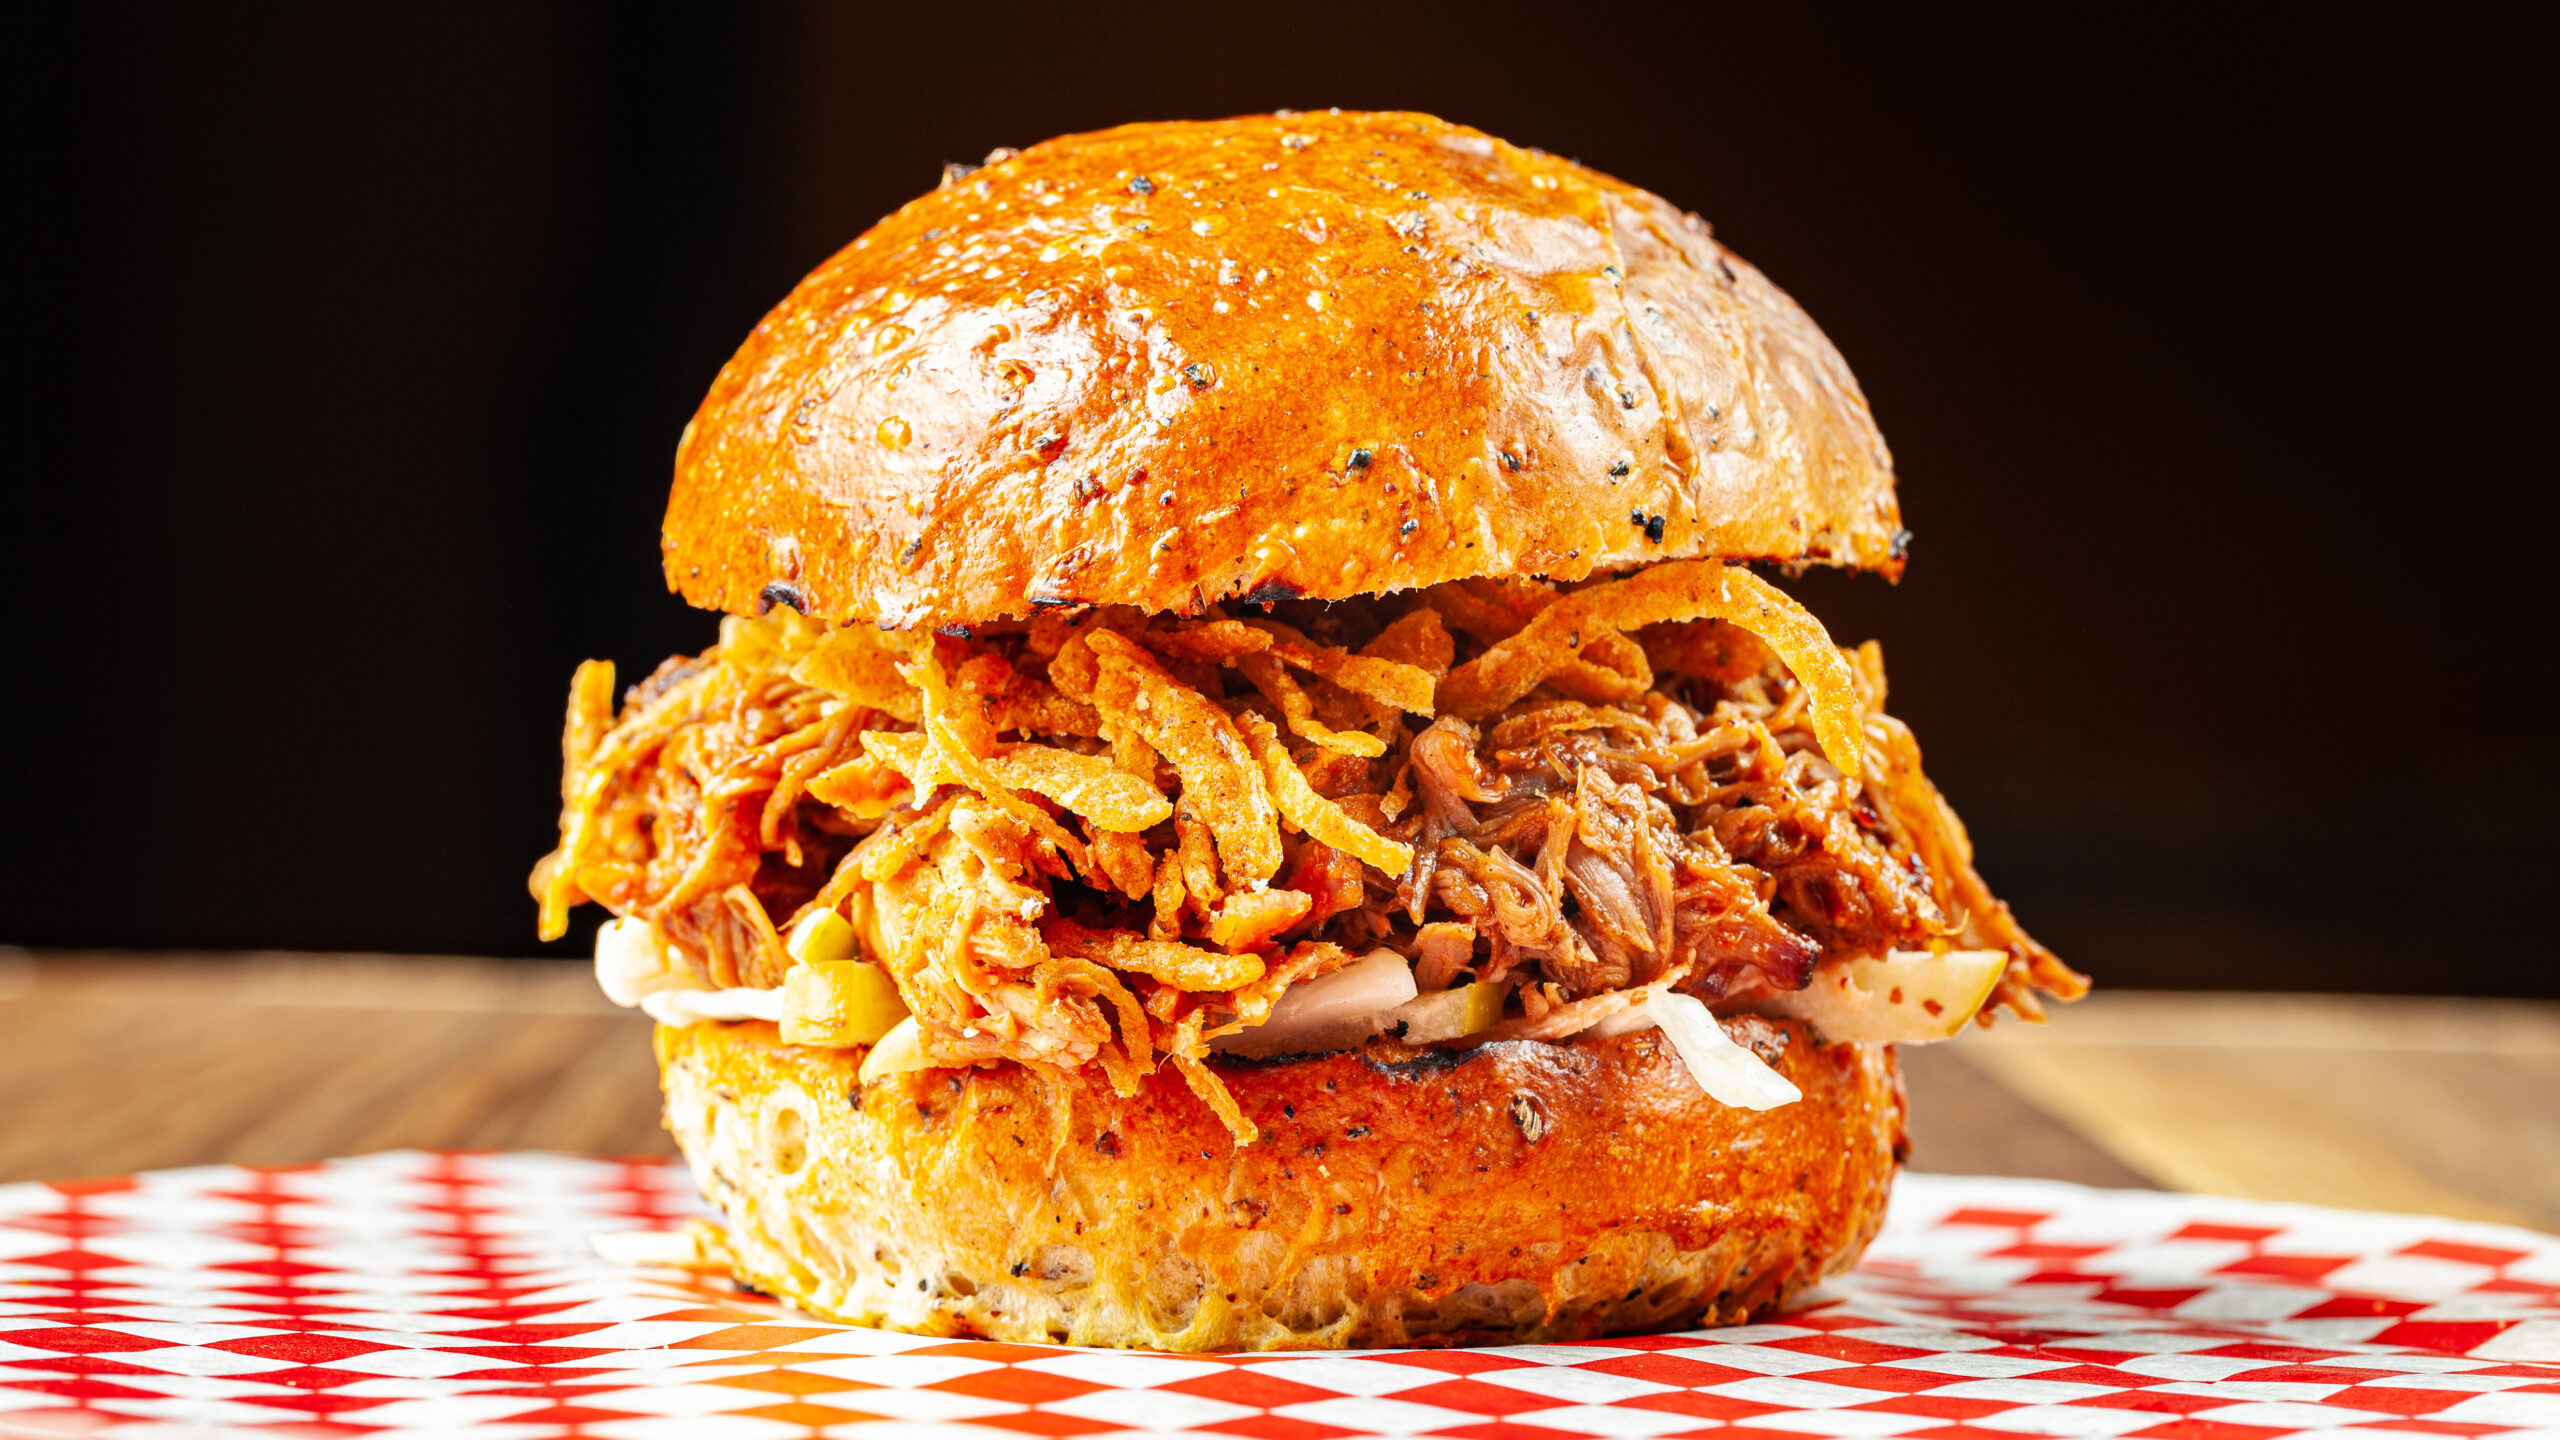 Prairie Dog Brewing's Alberta Red Pulled Pork Sandwich with pulled pork, barbecue sauce, apple slaw and crispy onions.